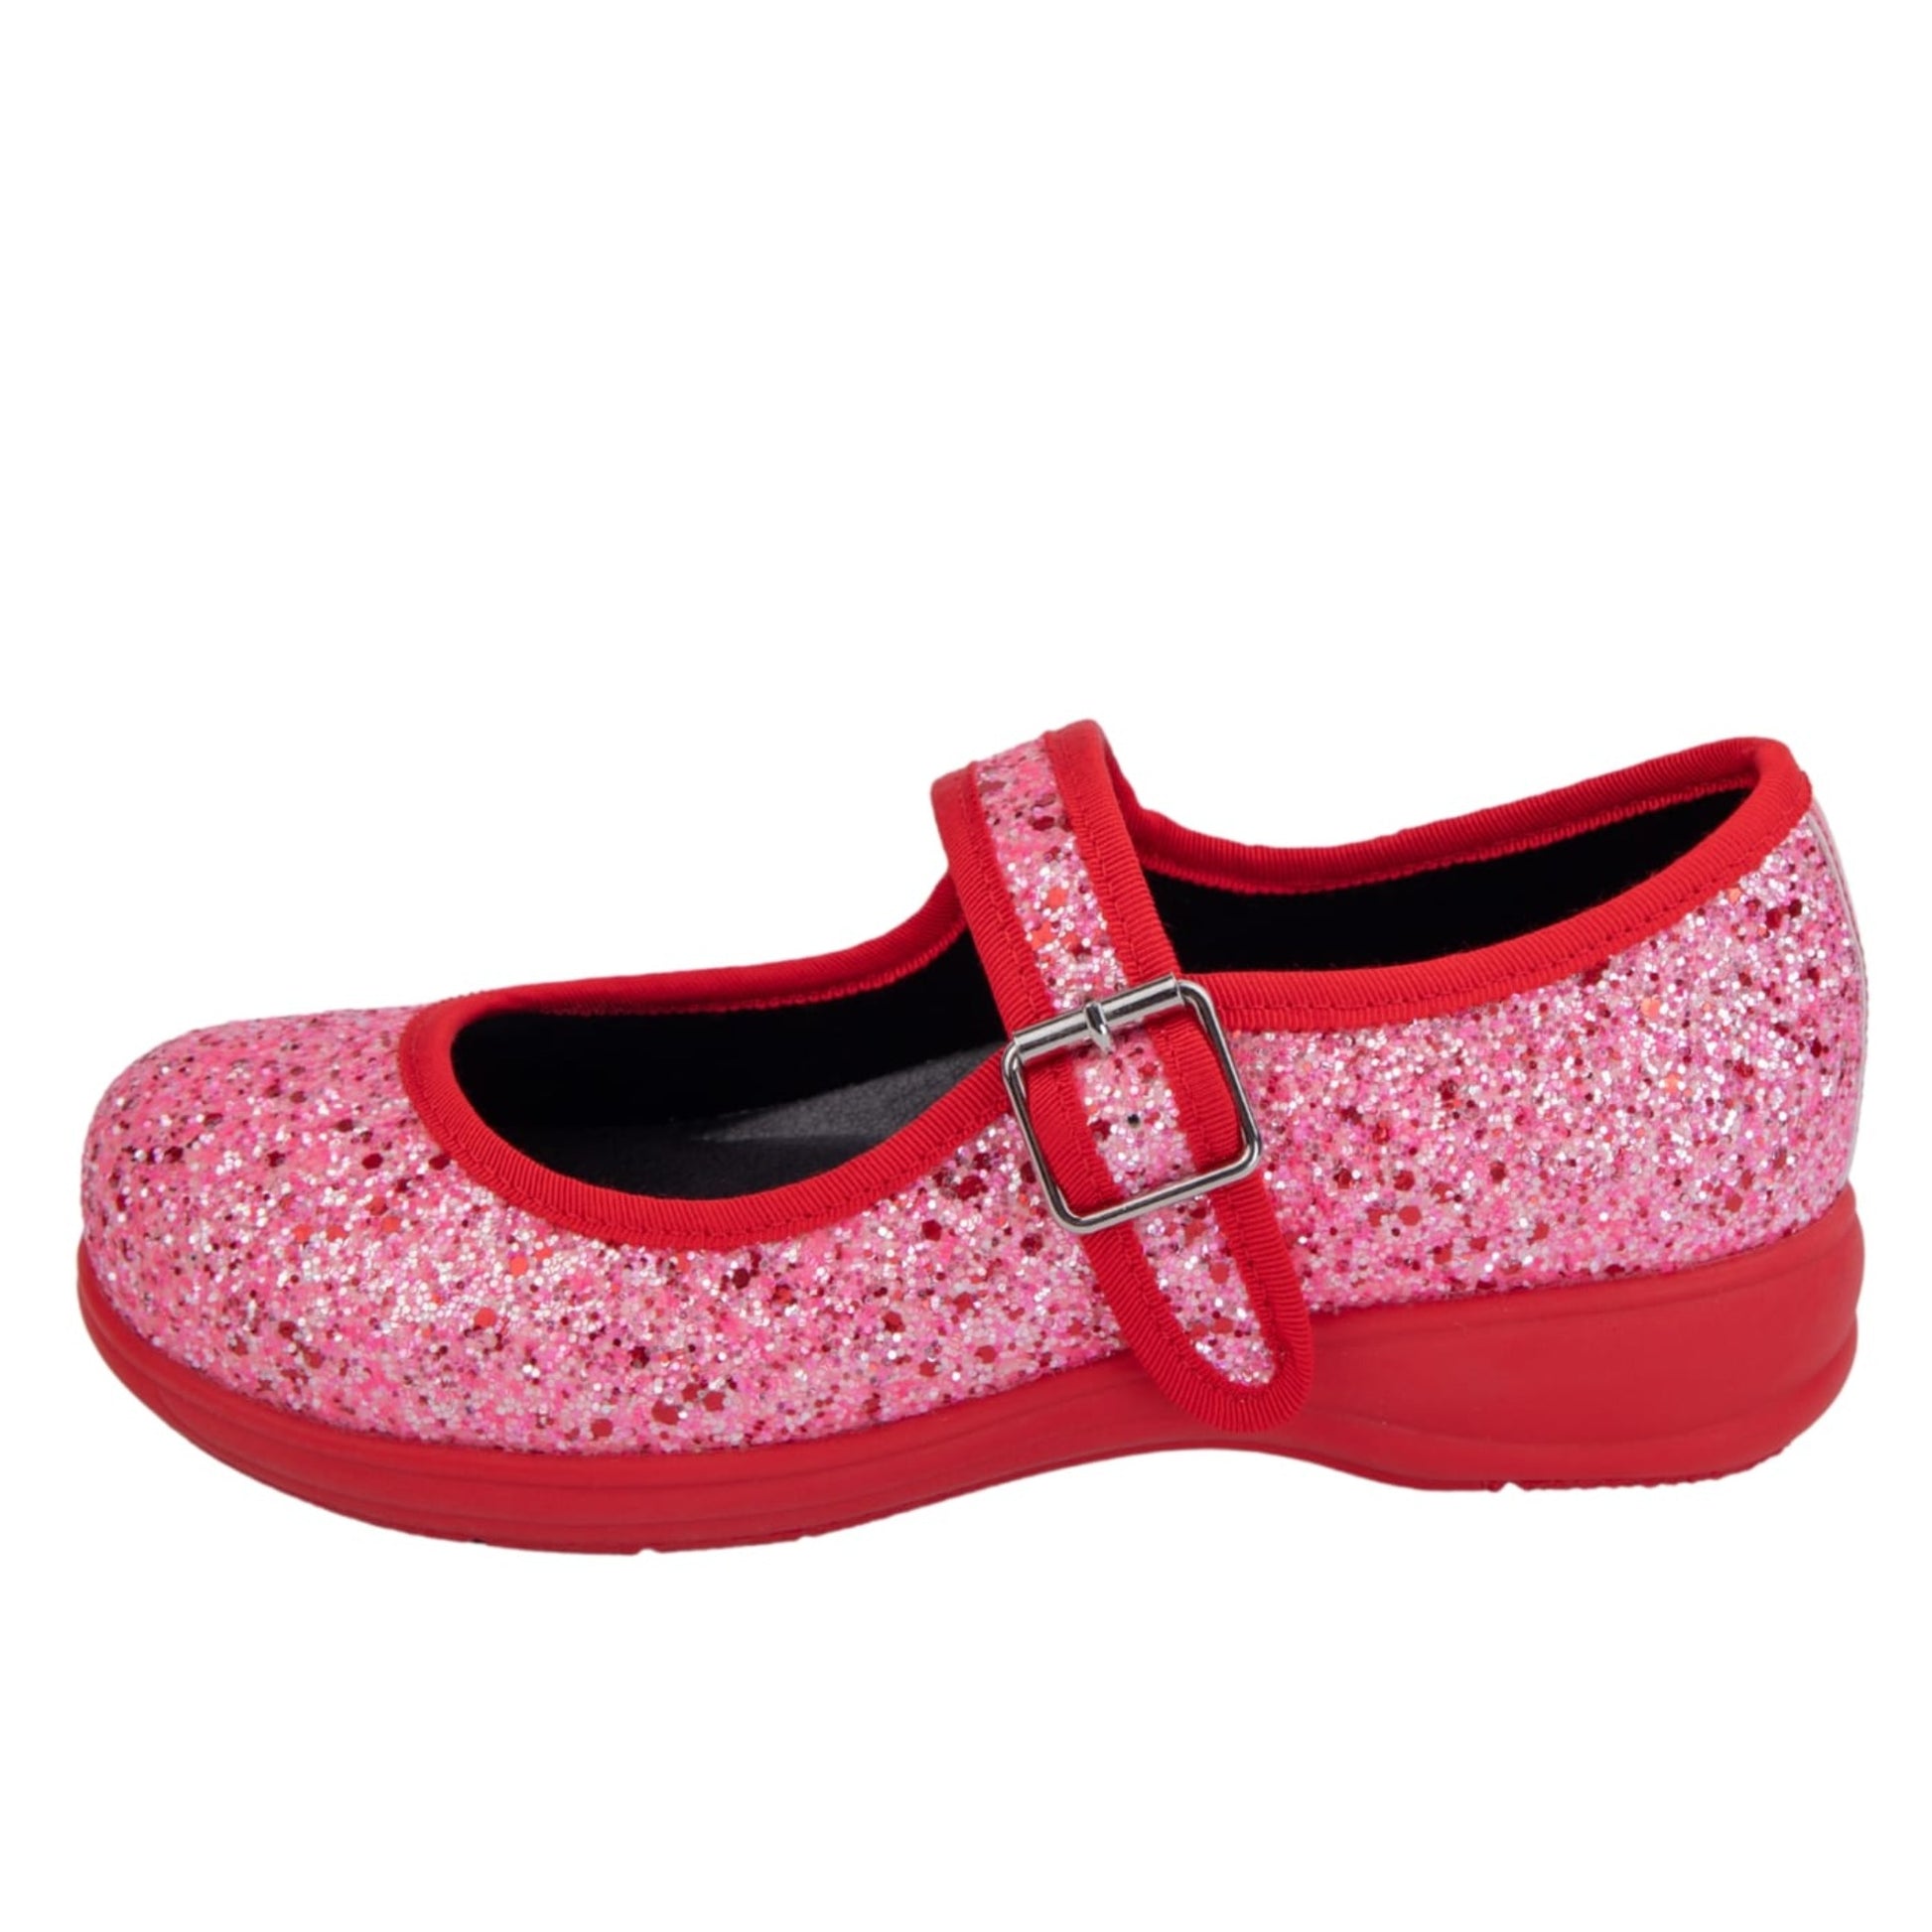 Sherbet Mary Janes by RainbowsAndFairies.com.au (Pink Glitter - Red Glitter - Mismatched Shoes - Glitter Shoes - Sparkle) - SKU: FW_MARYJ_GLITR_SHE - Pic-04